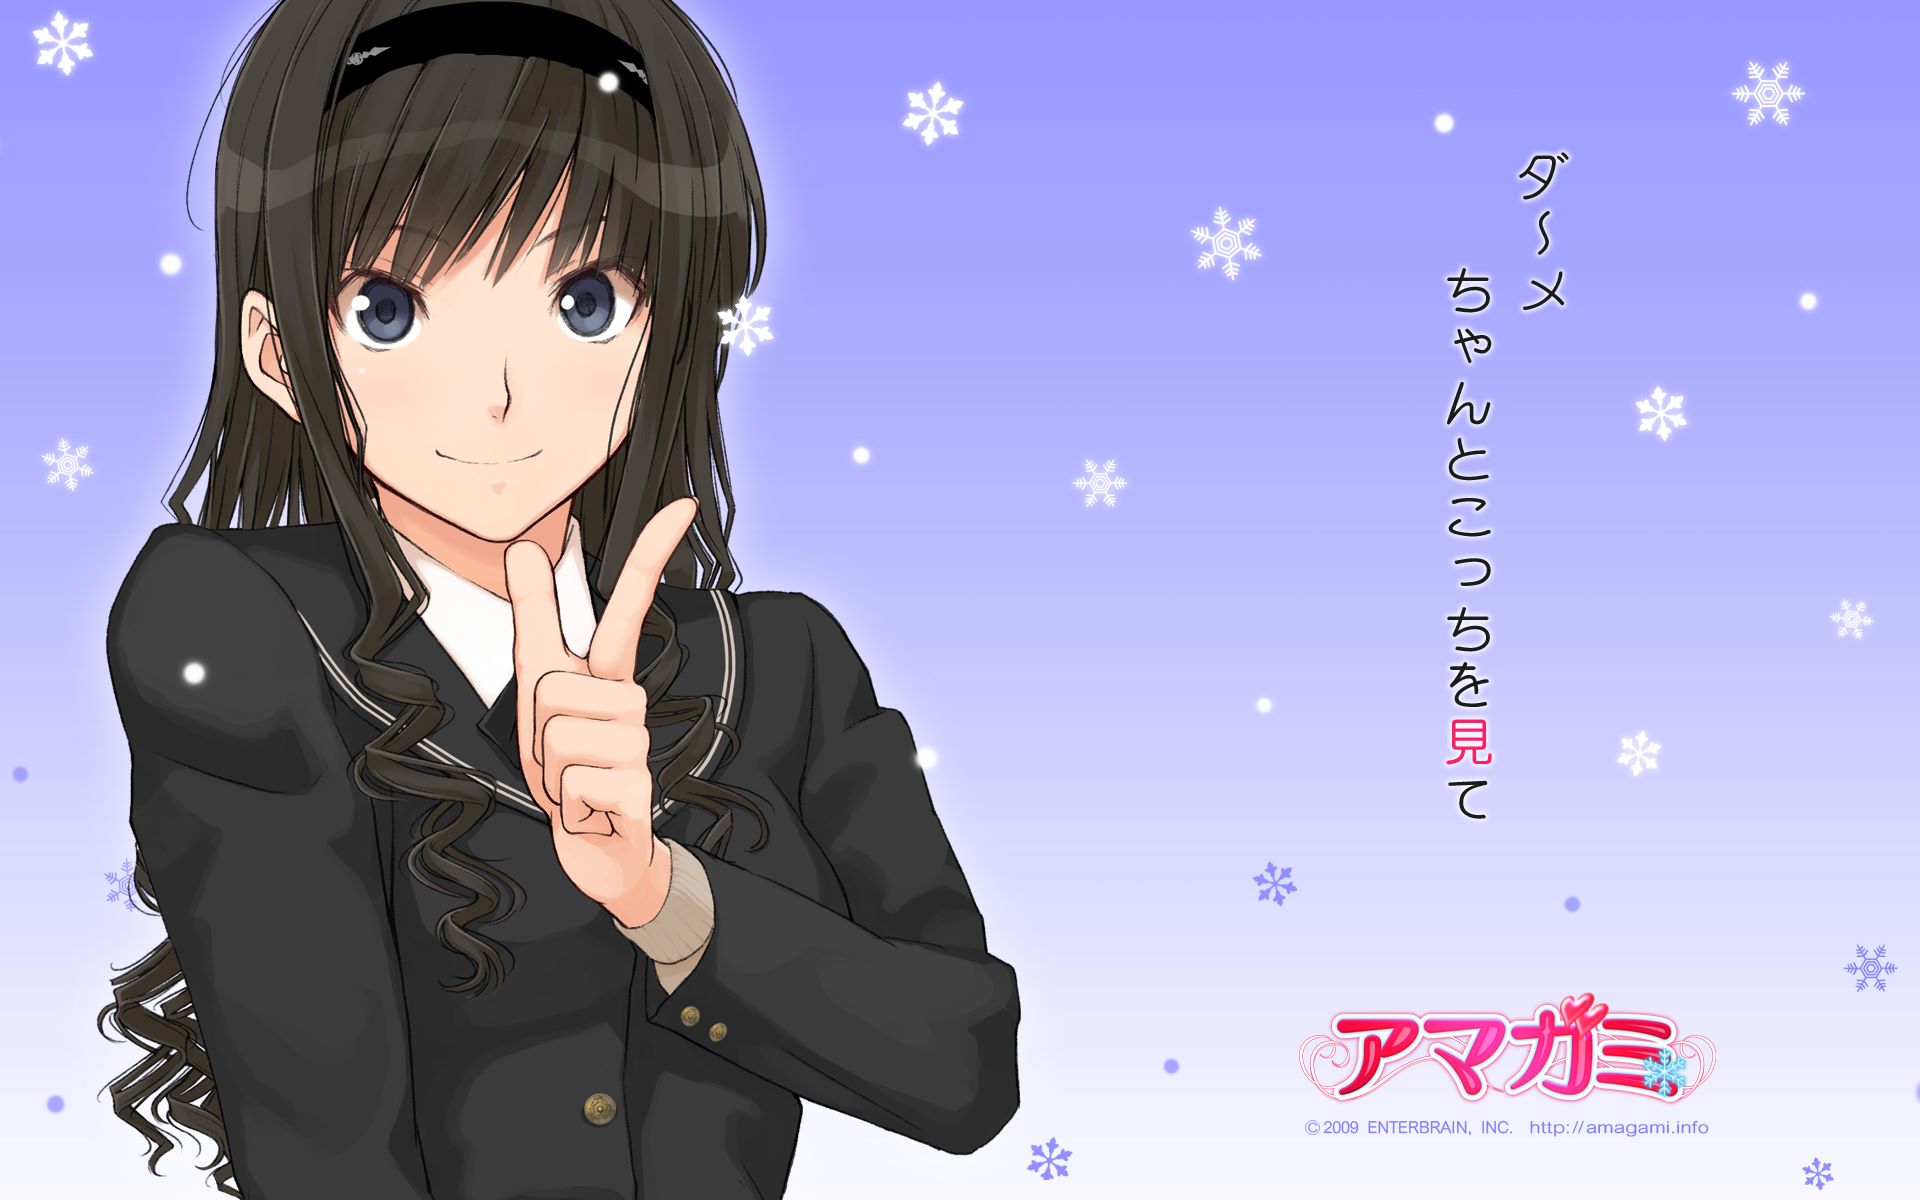 [Spoilers][Rewatch] Amagami SS+ Plus - Episode 8 